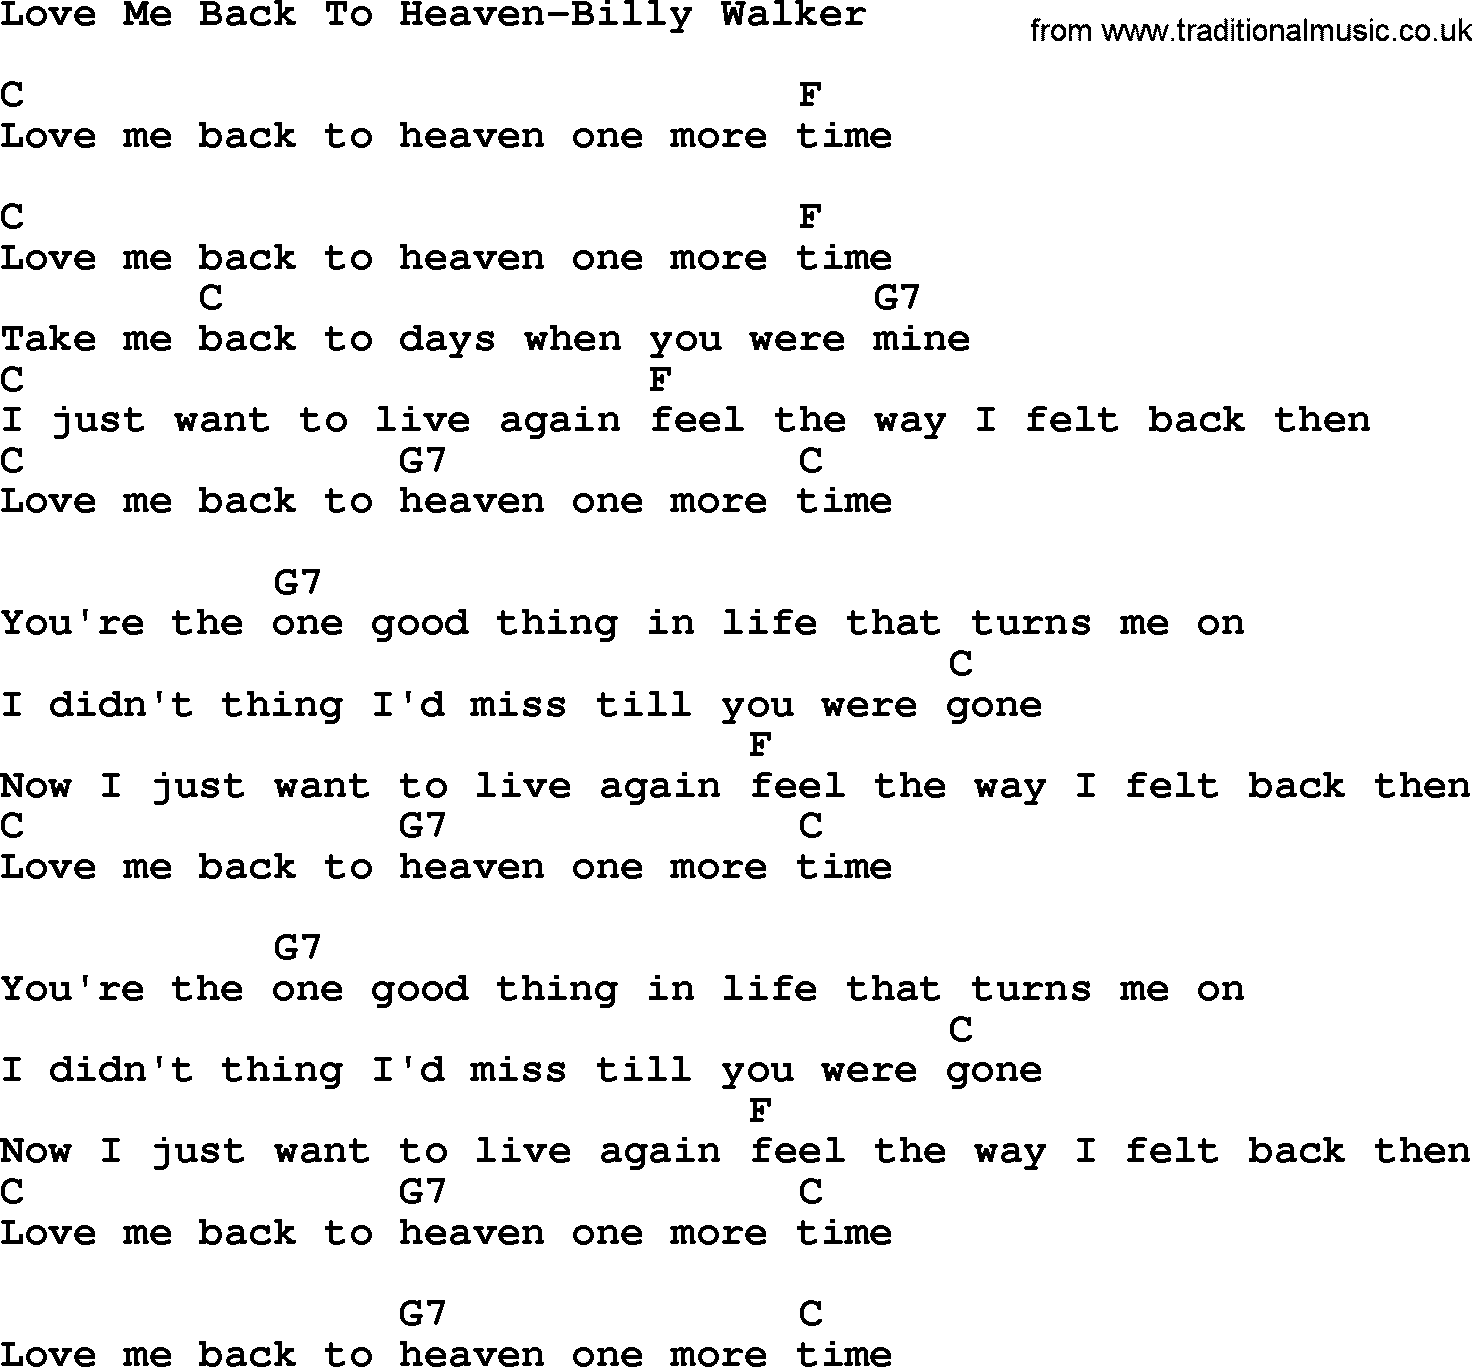 Country music song: Love Me Back To Heaven-Billy Walker lyrics and chords